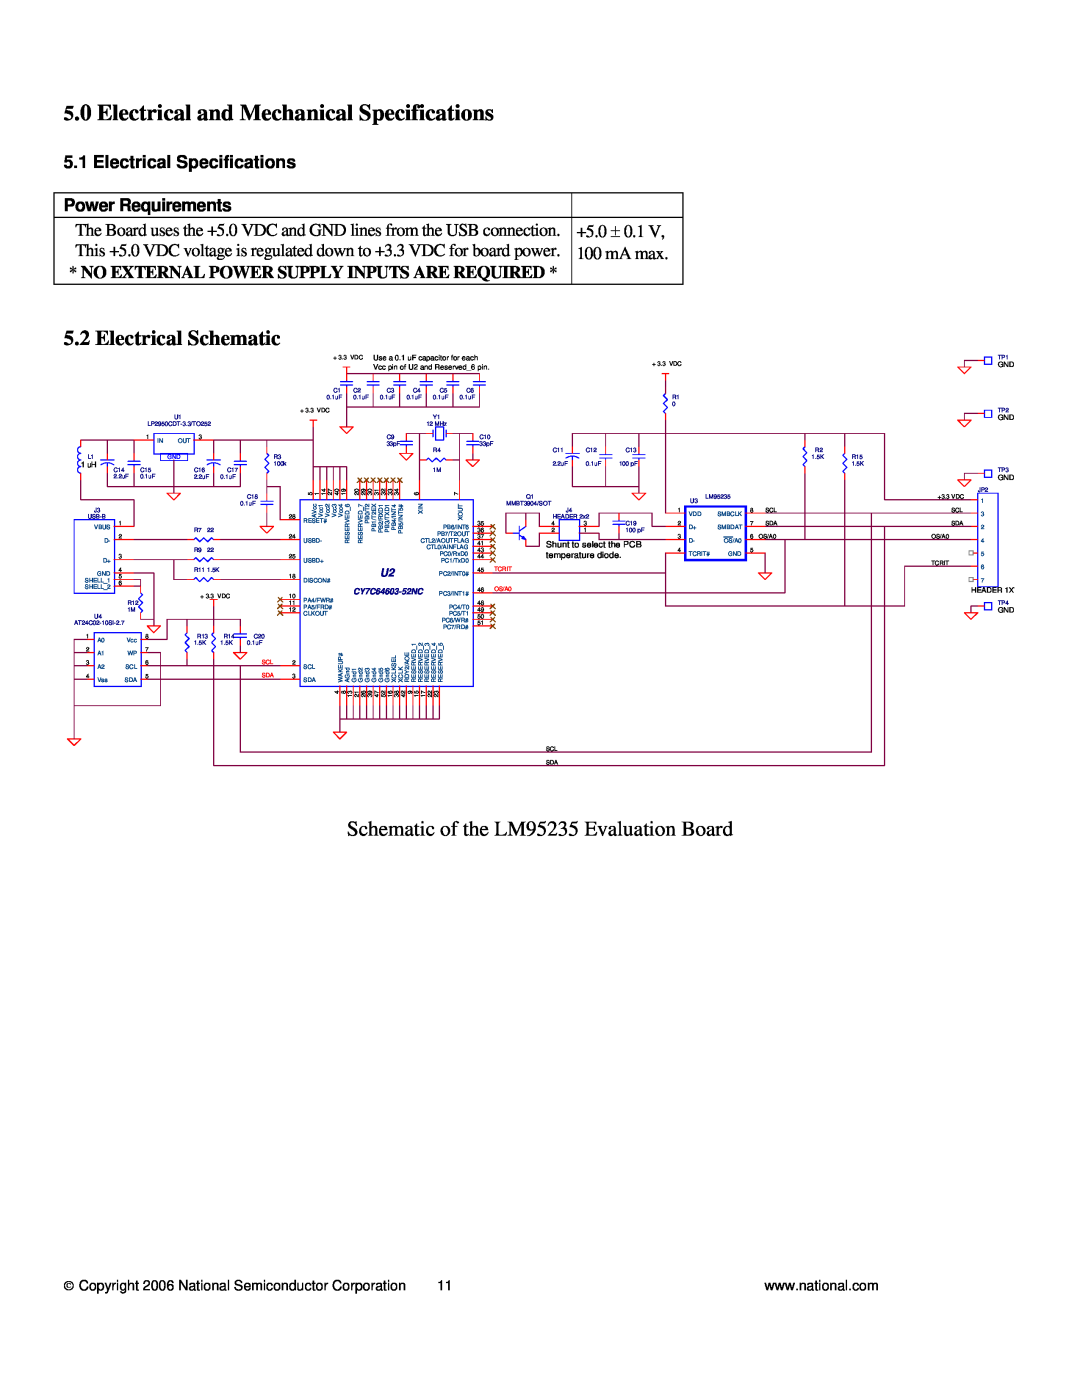 National LM95235 Electrical Schematic, Electrical and Mechanical Specifications, Shunt to select the PCB, CY7C64603-52NC 